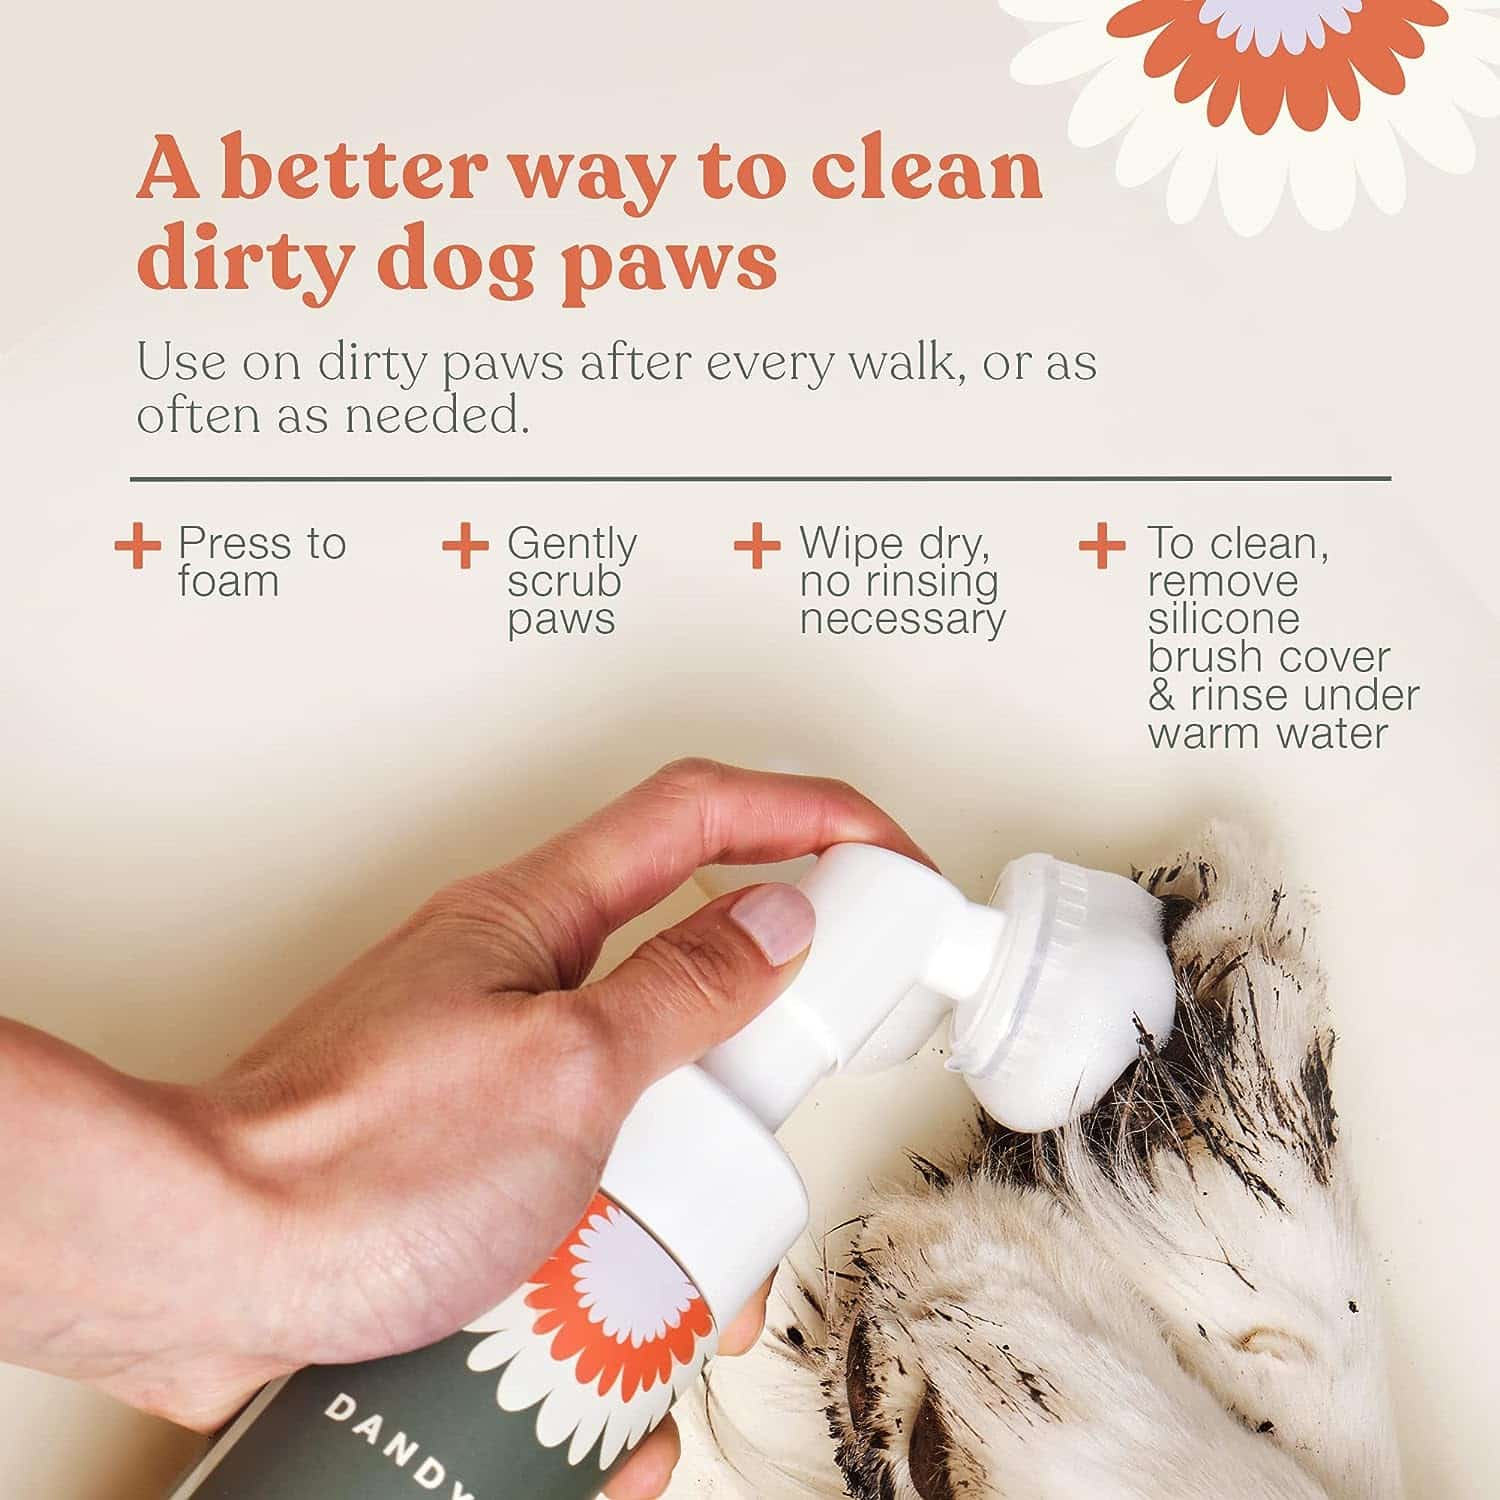 Dandylion Clean Paws Review: A Gentle and Effective No-Rinse Foaming Cleanser